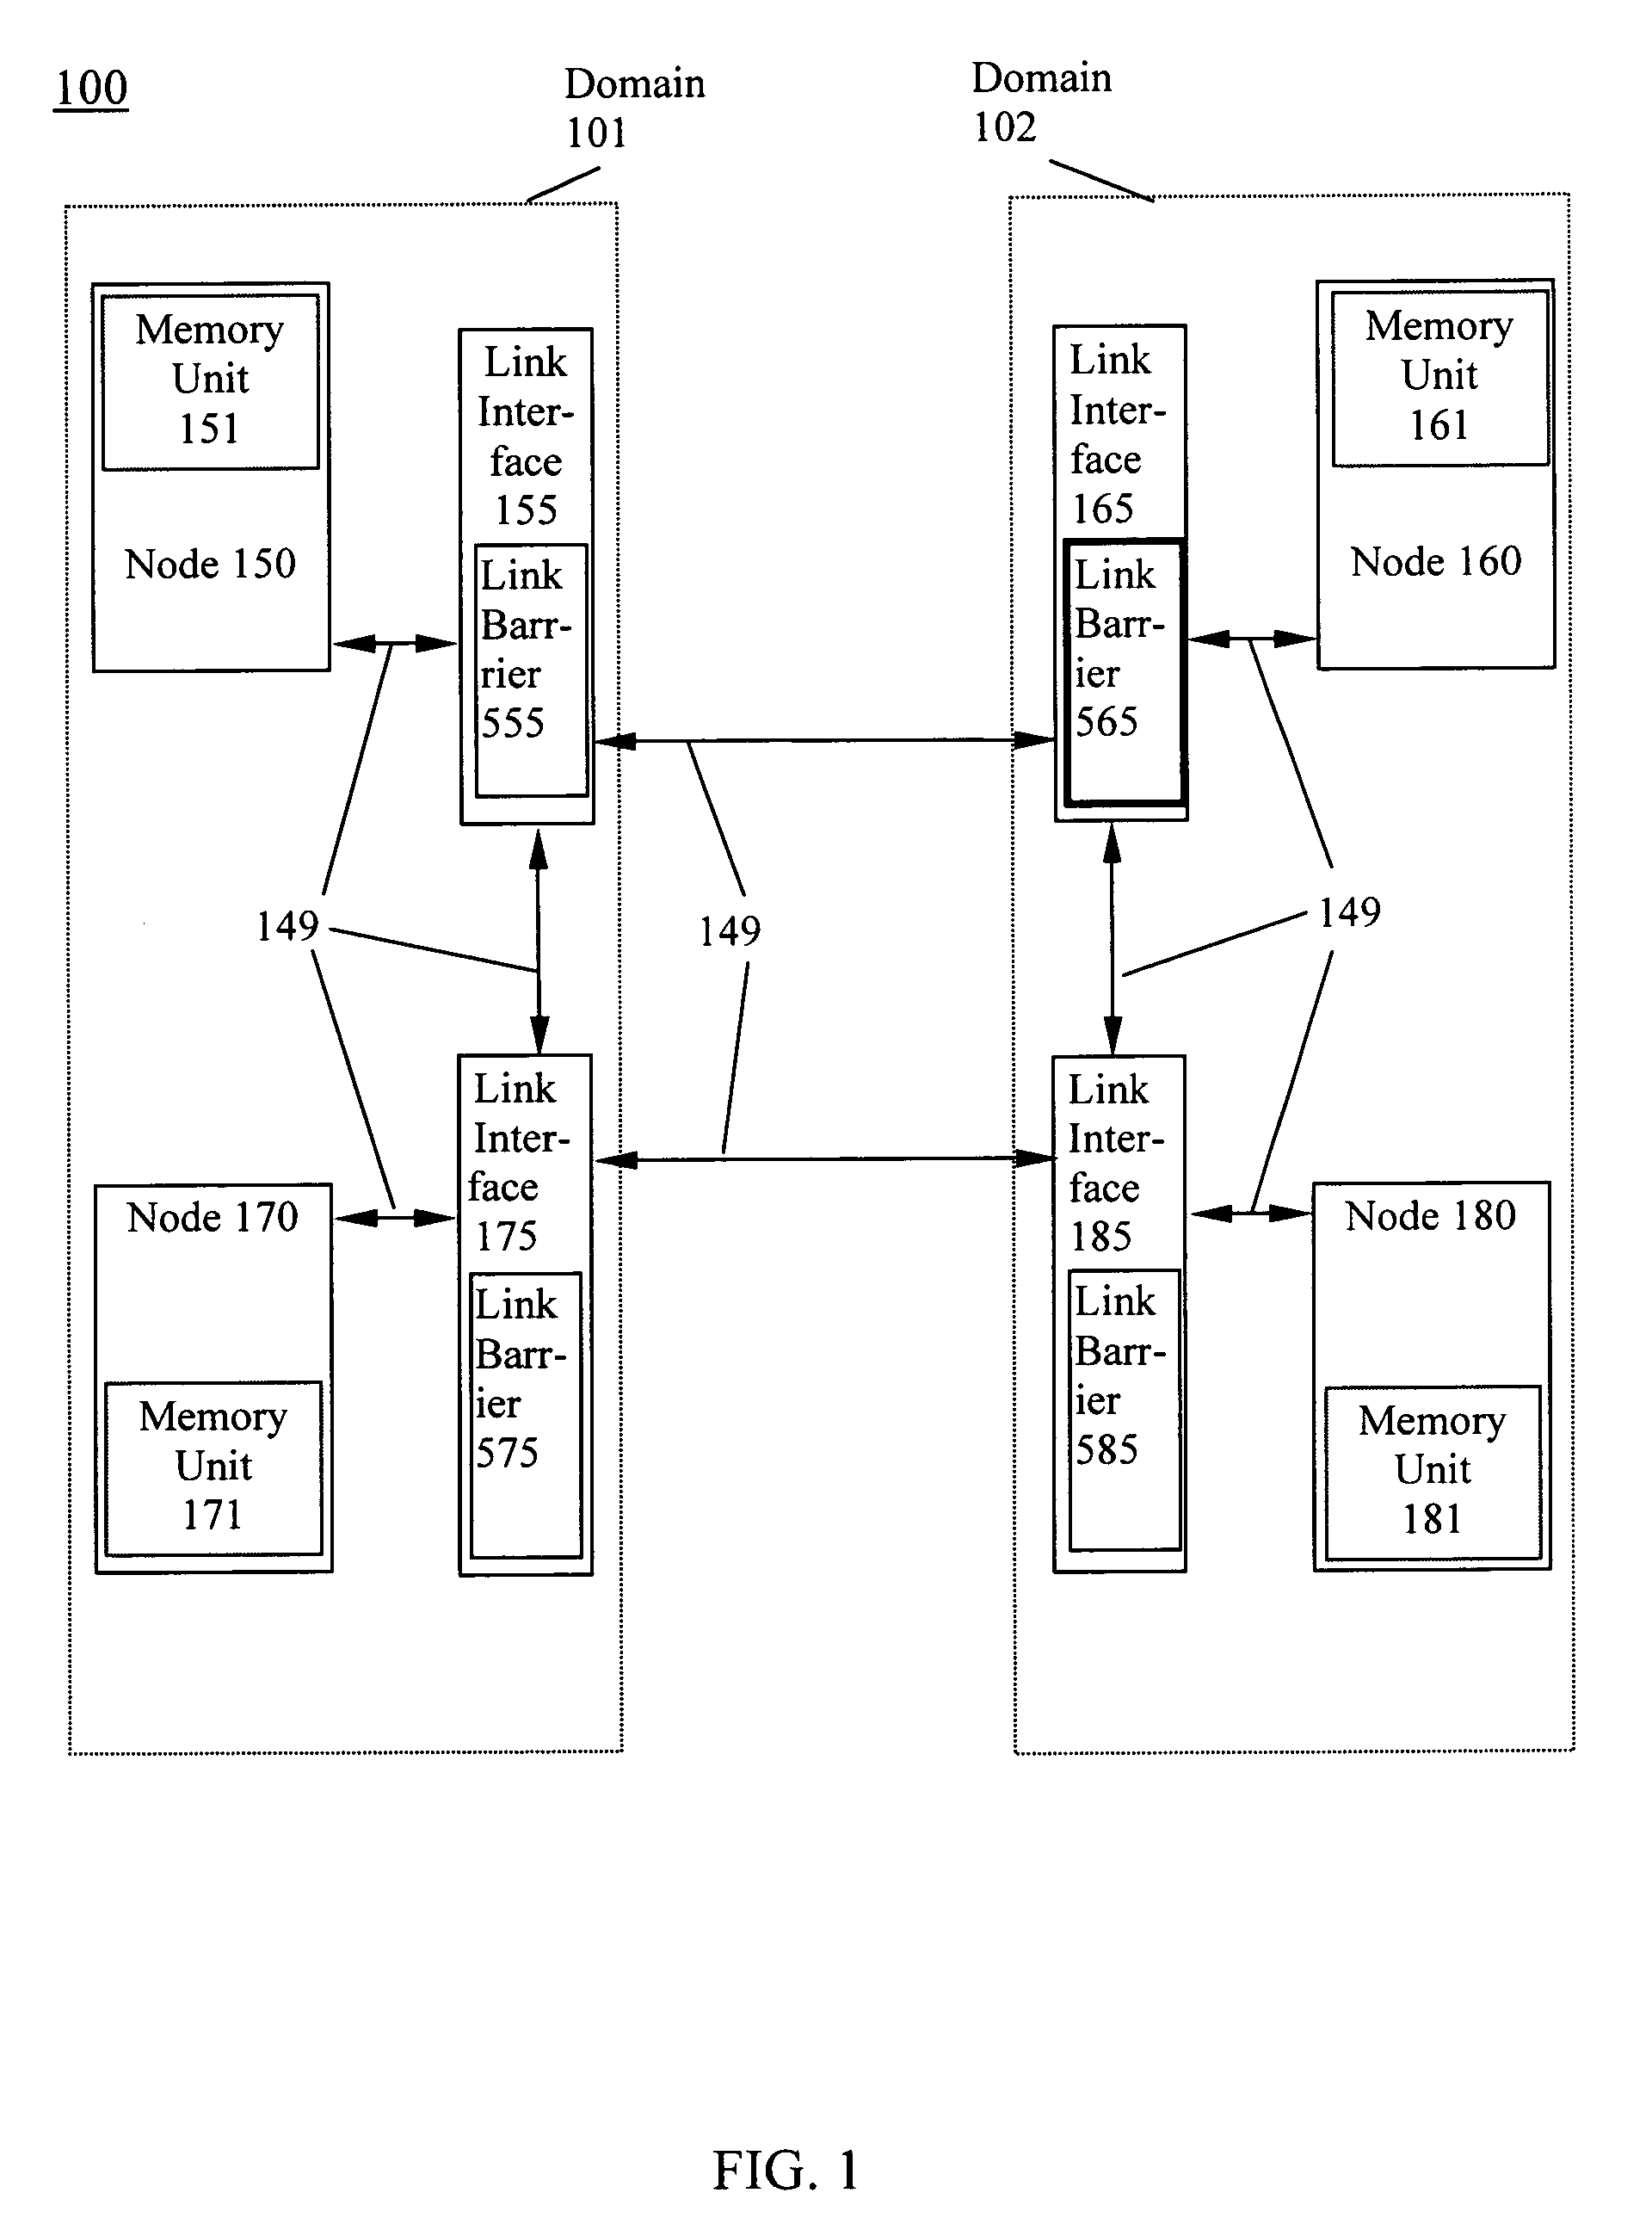 Method and apparatus for supporting multiple independent failure domains